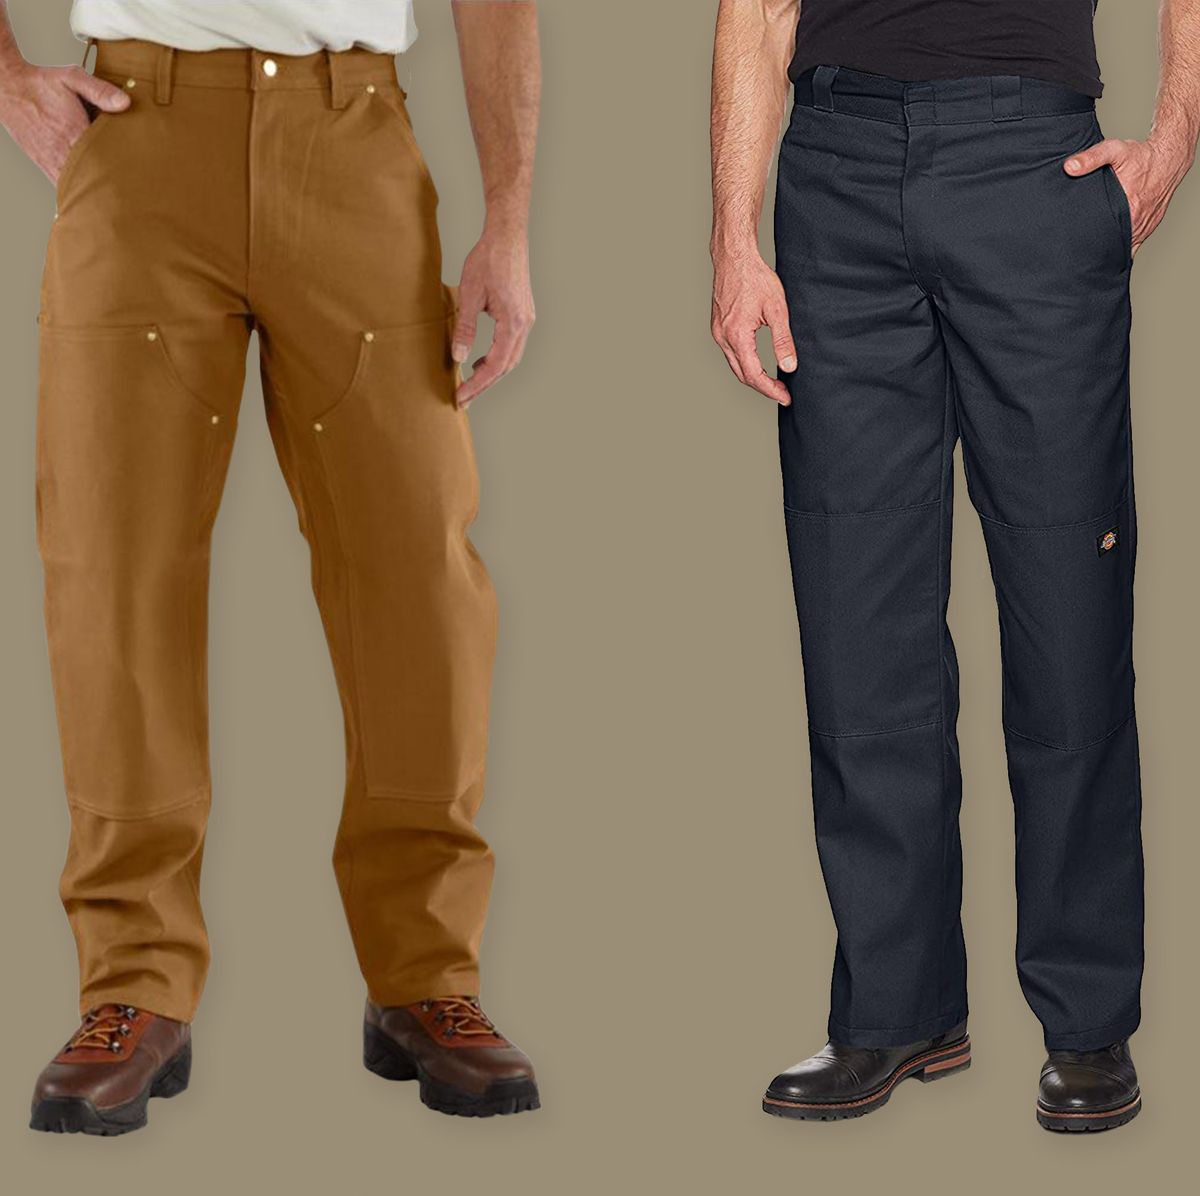 Carhartt Pant Review - Rugged Flex and Canvas Dungaree 